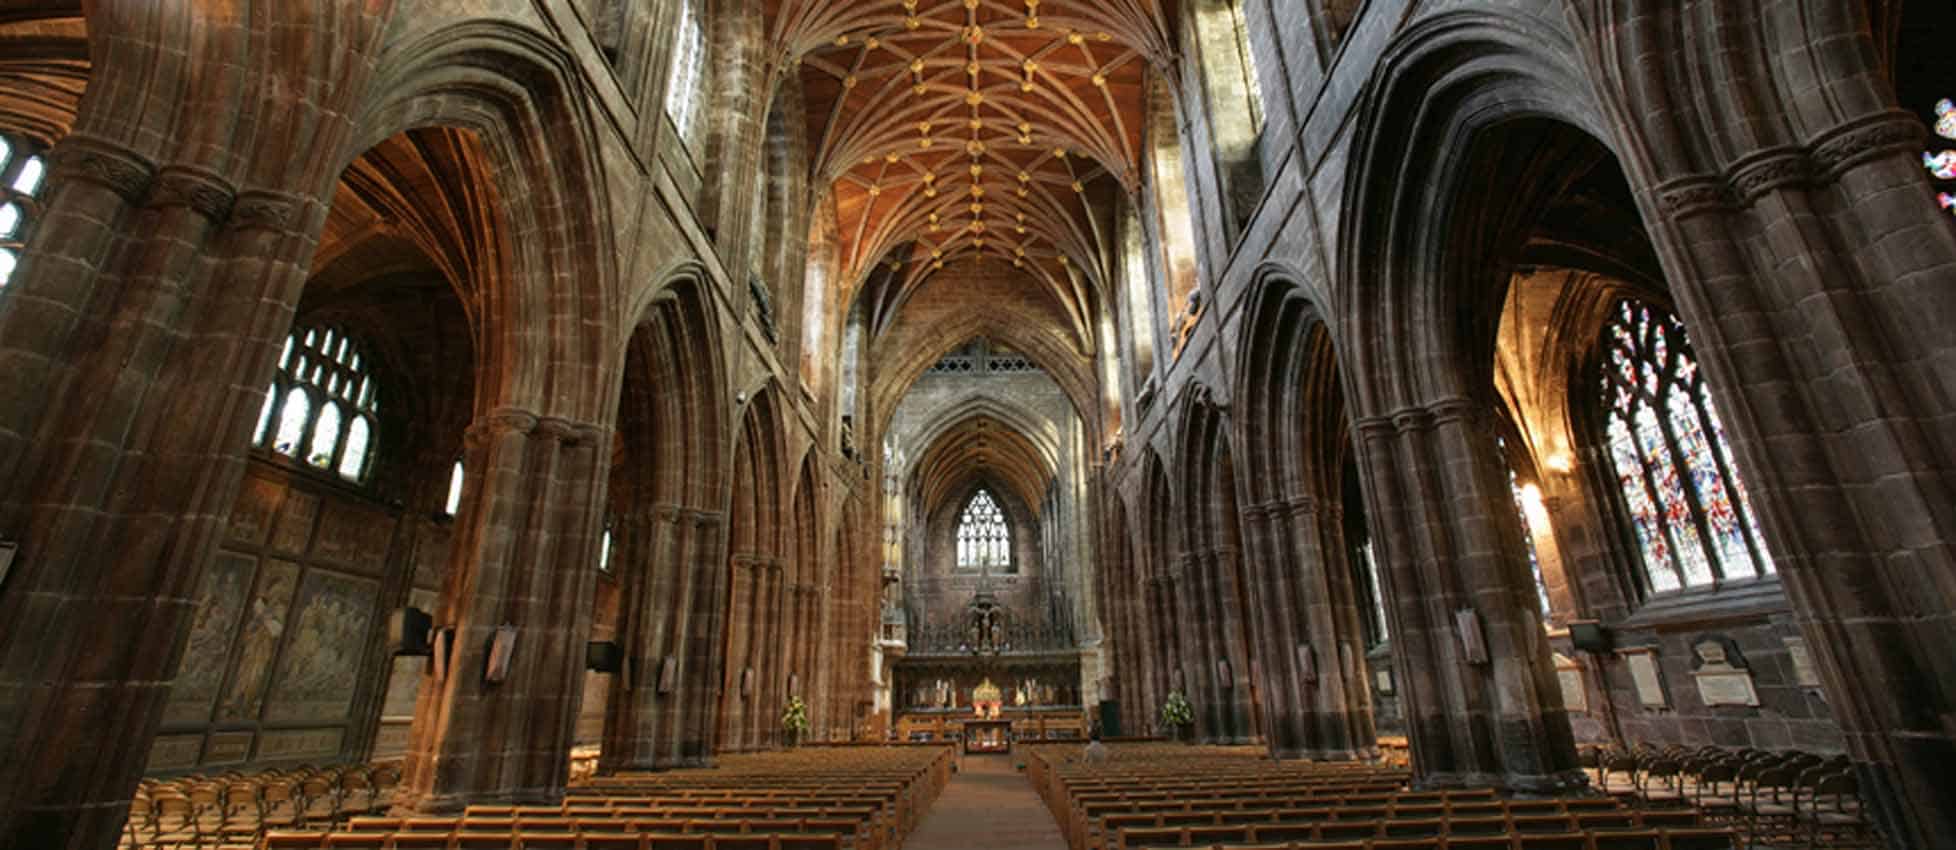 Cathedral_Chester2.jpg